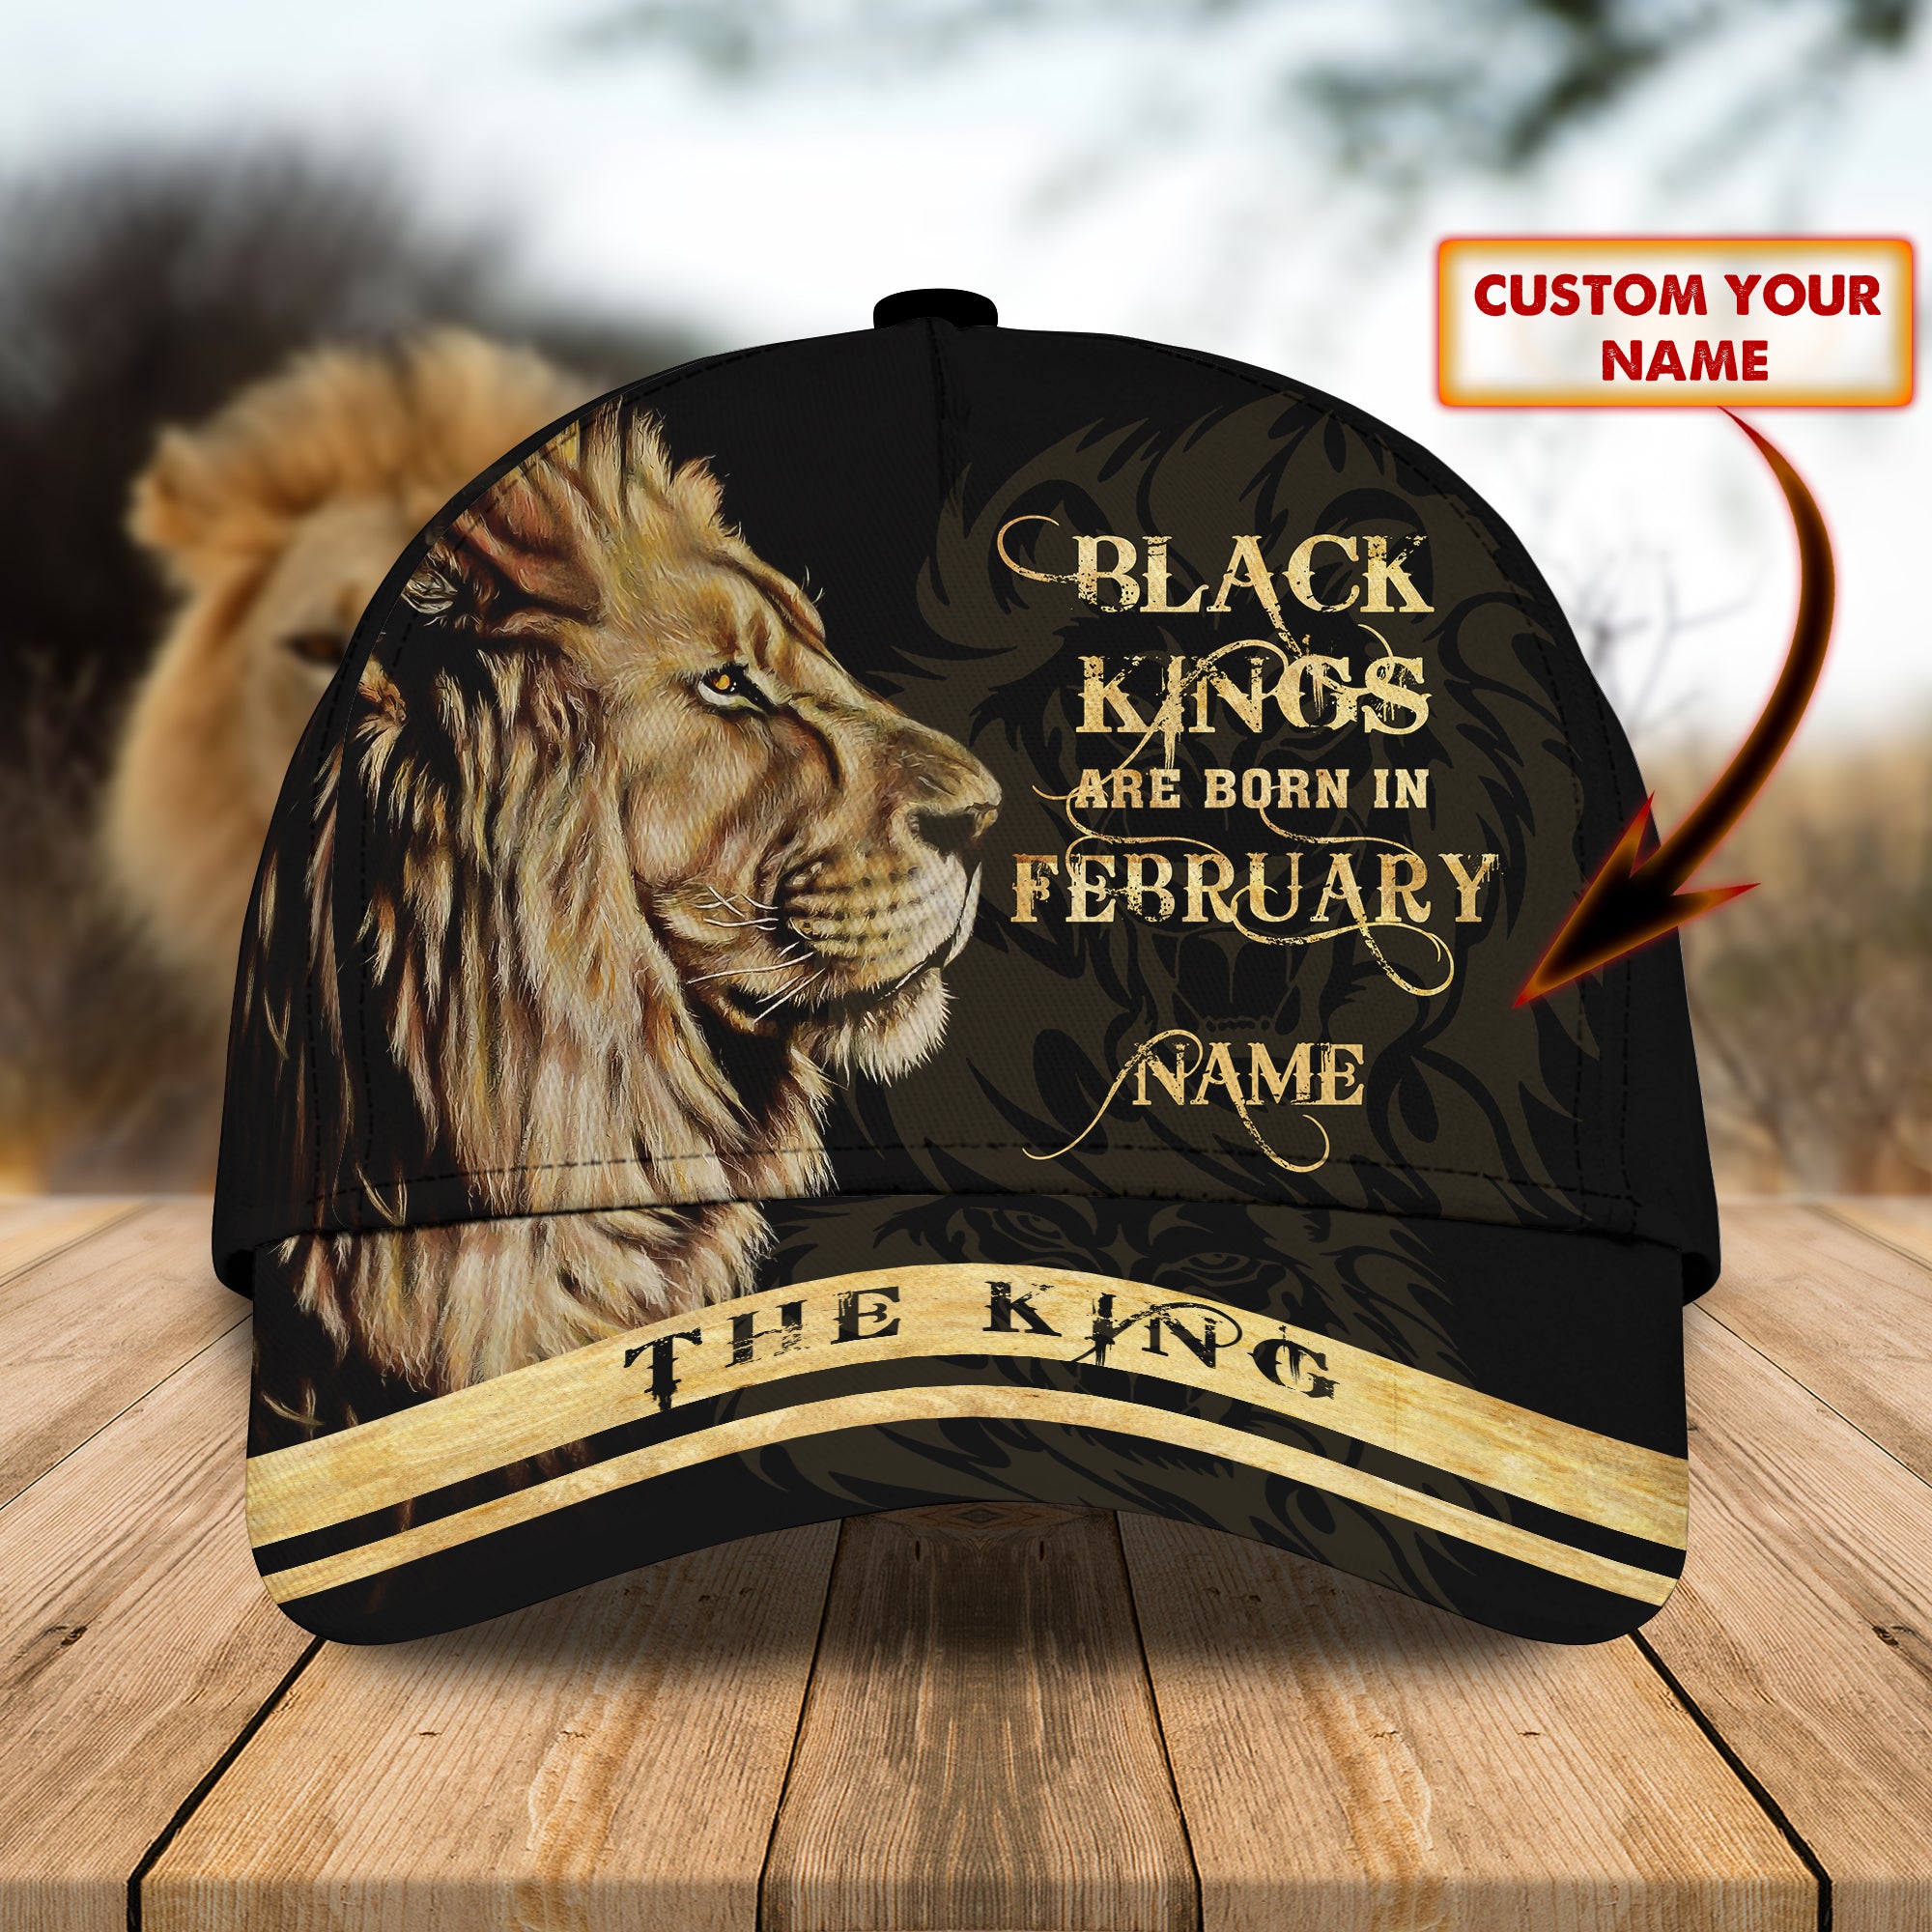 Black Kings Are Born In February - Personalized Name Cap 42 - Bhn97